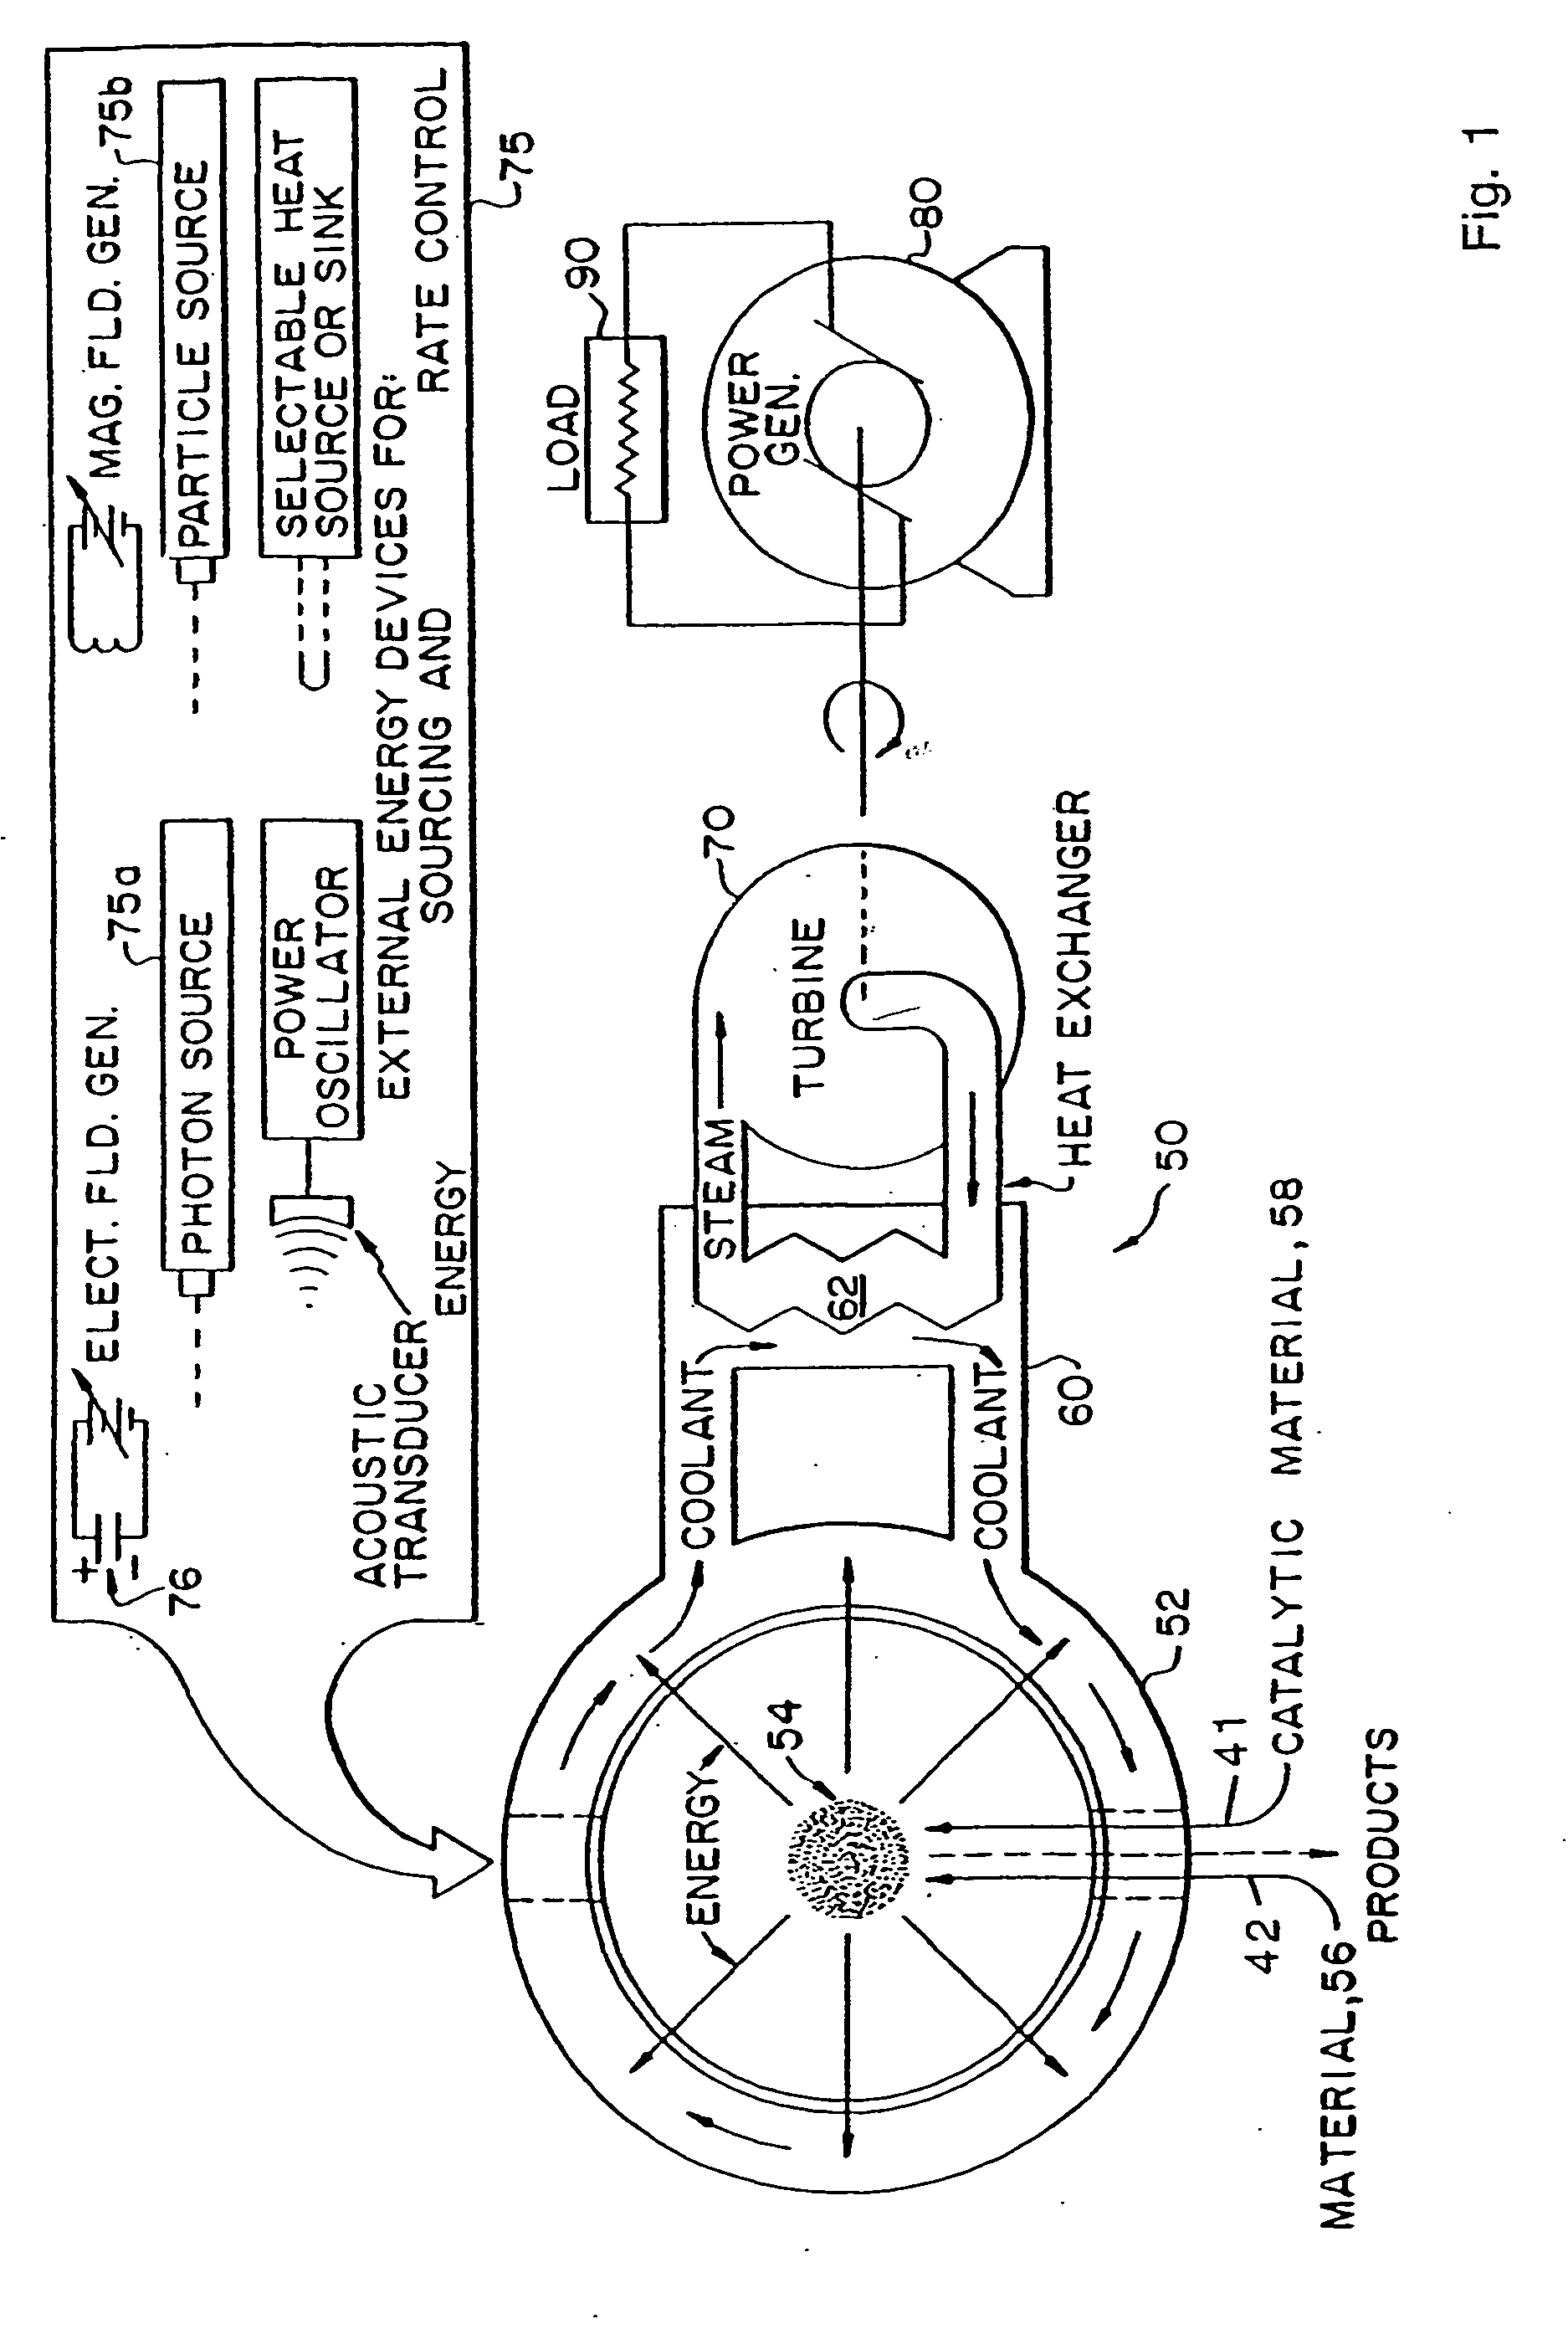 Hydrogen power, plasma, and reactor for lasing, and power conversion